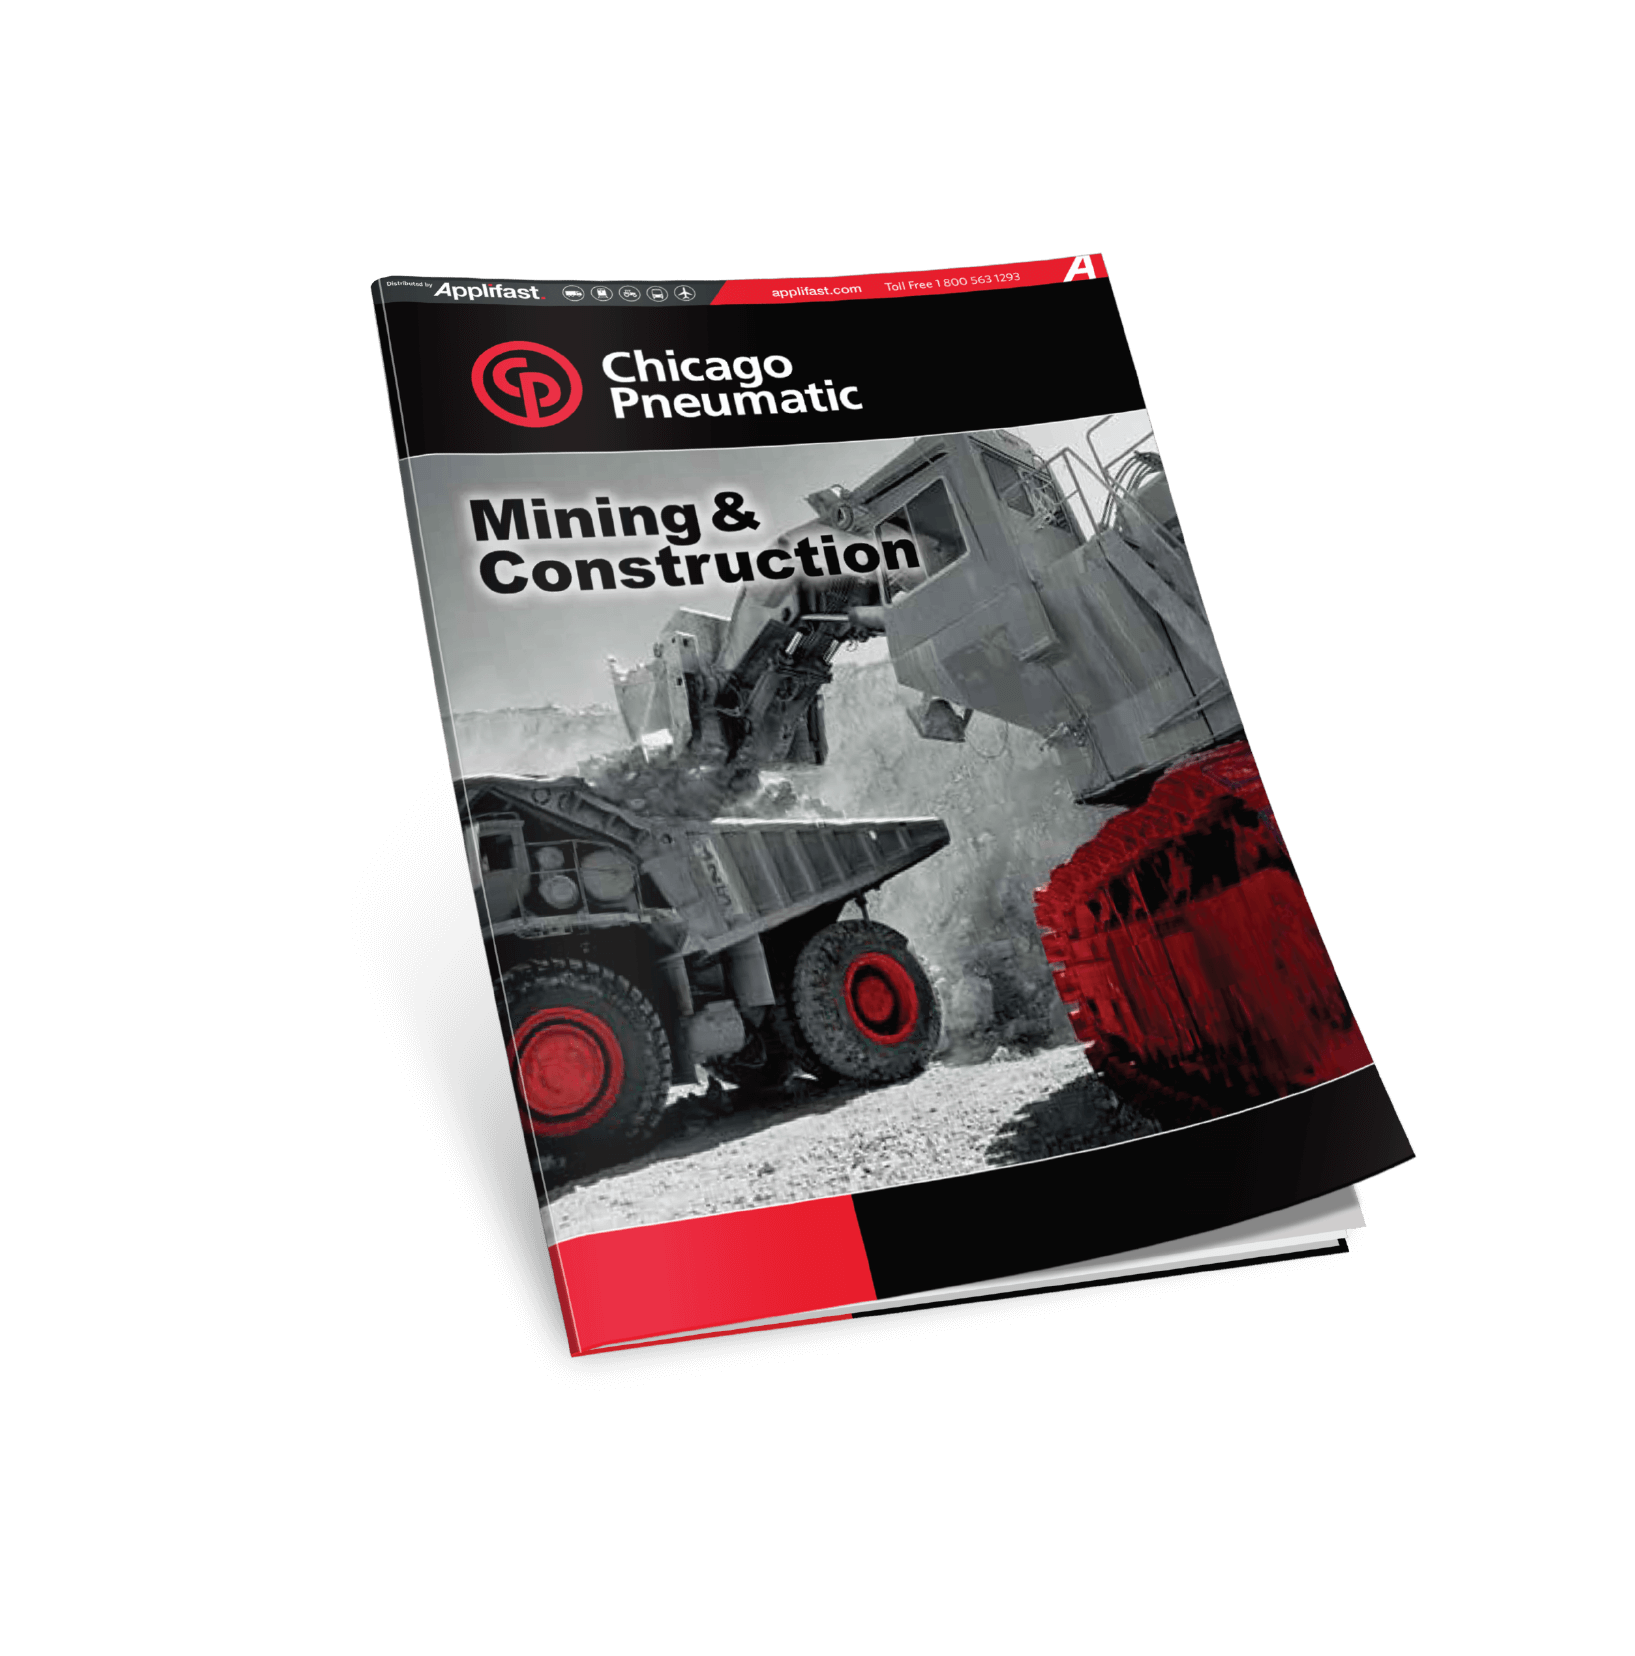 APPLIFAST - CHICAGO PNEUMATIC MINING & CONSTRUCTION CATALOGUE